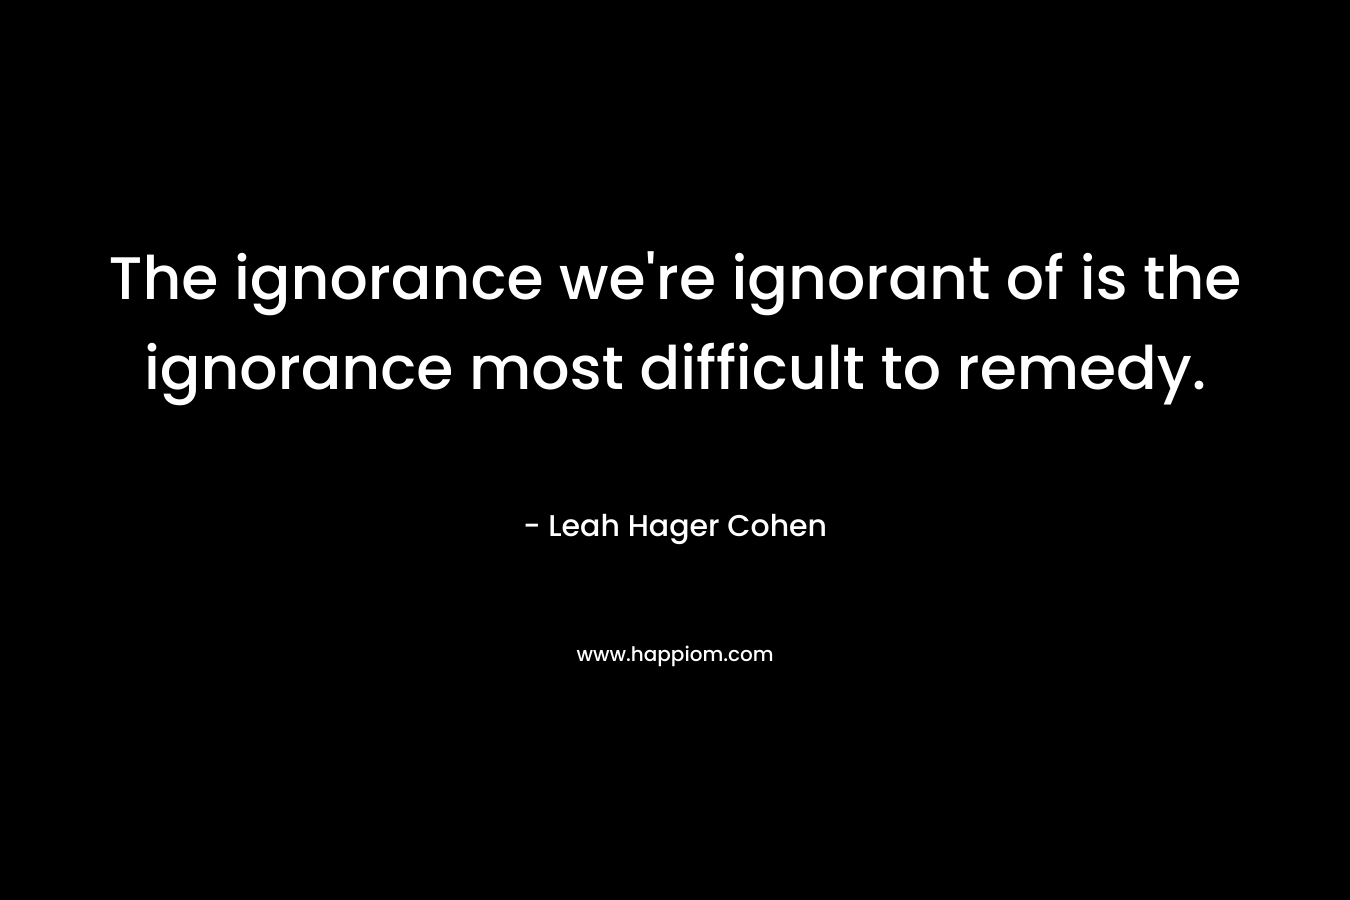 The ignorance we're ignorant of is the ignorance most difficult to remedy.